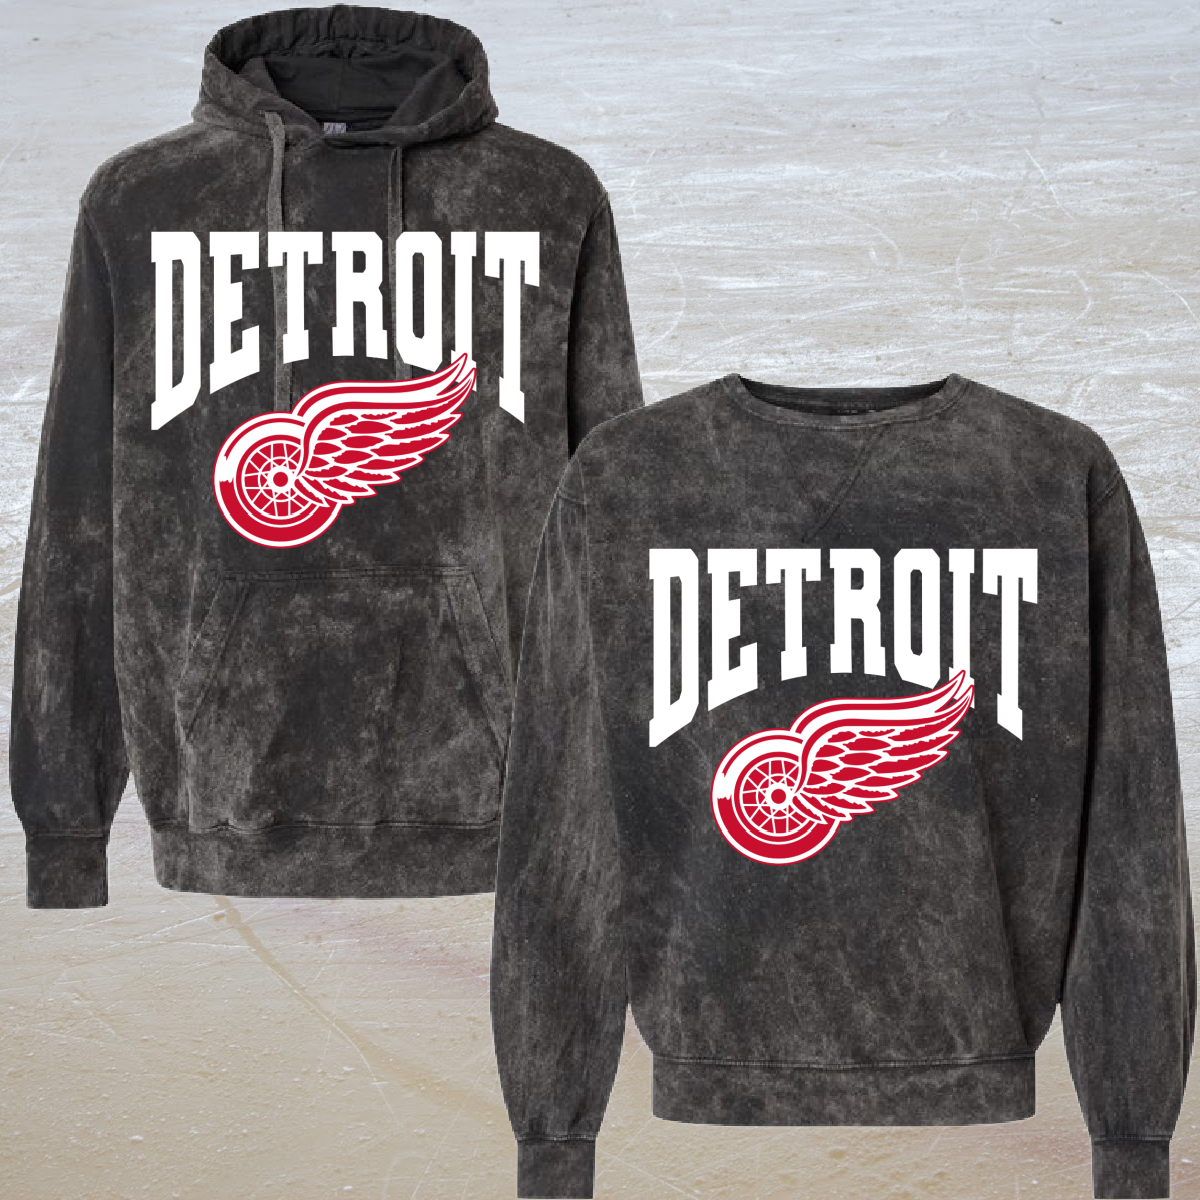 Detroit with Logo Mineral Washed Hoodie or Crewneck (Adult) - PREORDER - WILL SHIP BY 3/11